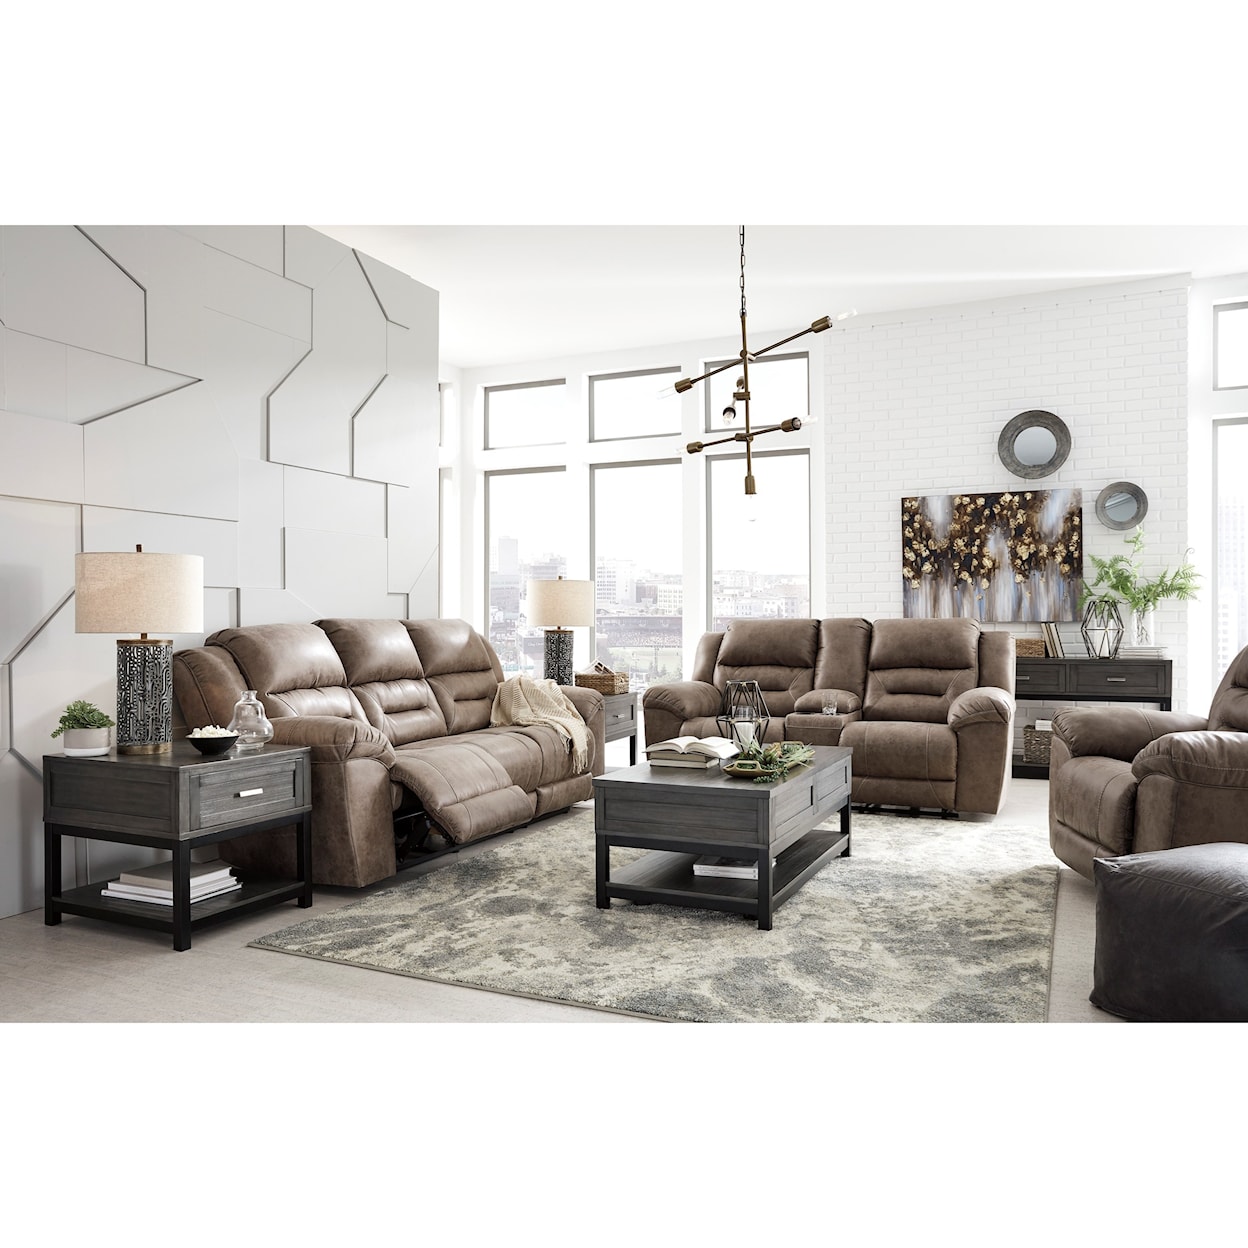 Benchcraft Stoneland Power Reclining Living Room Group